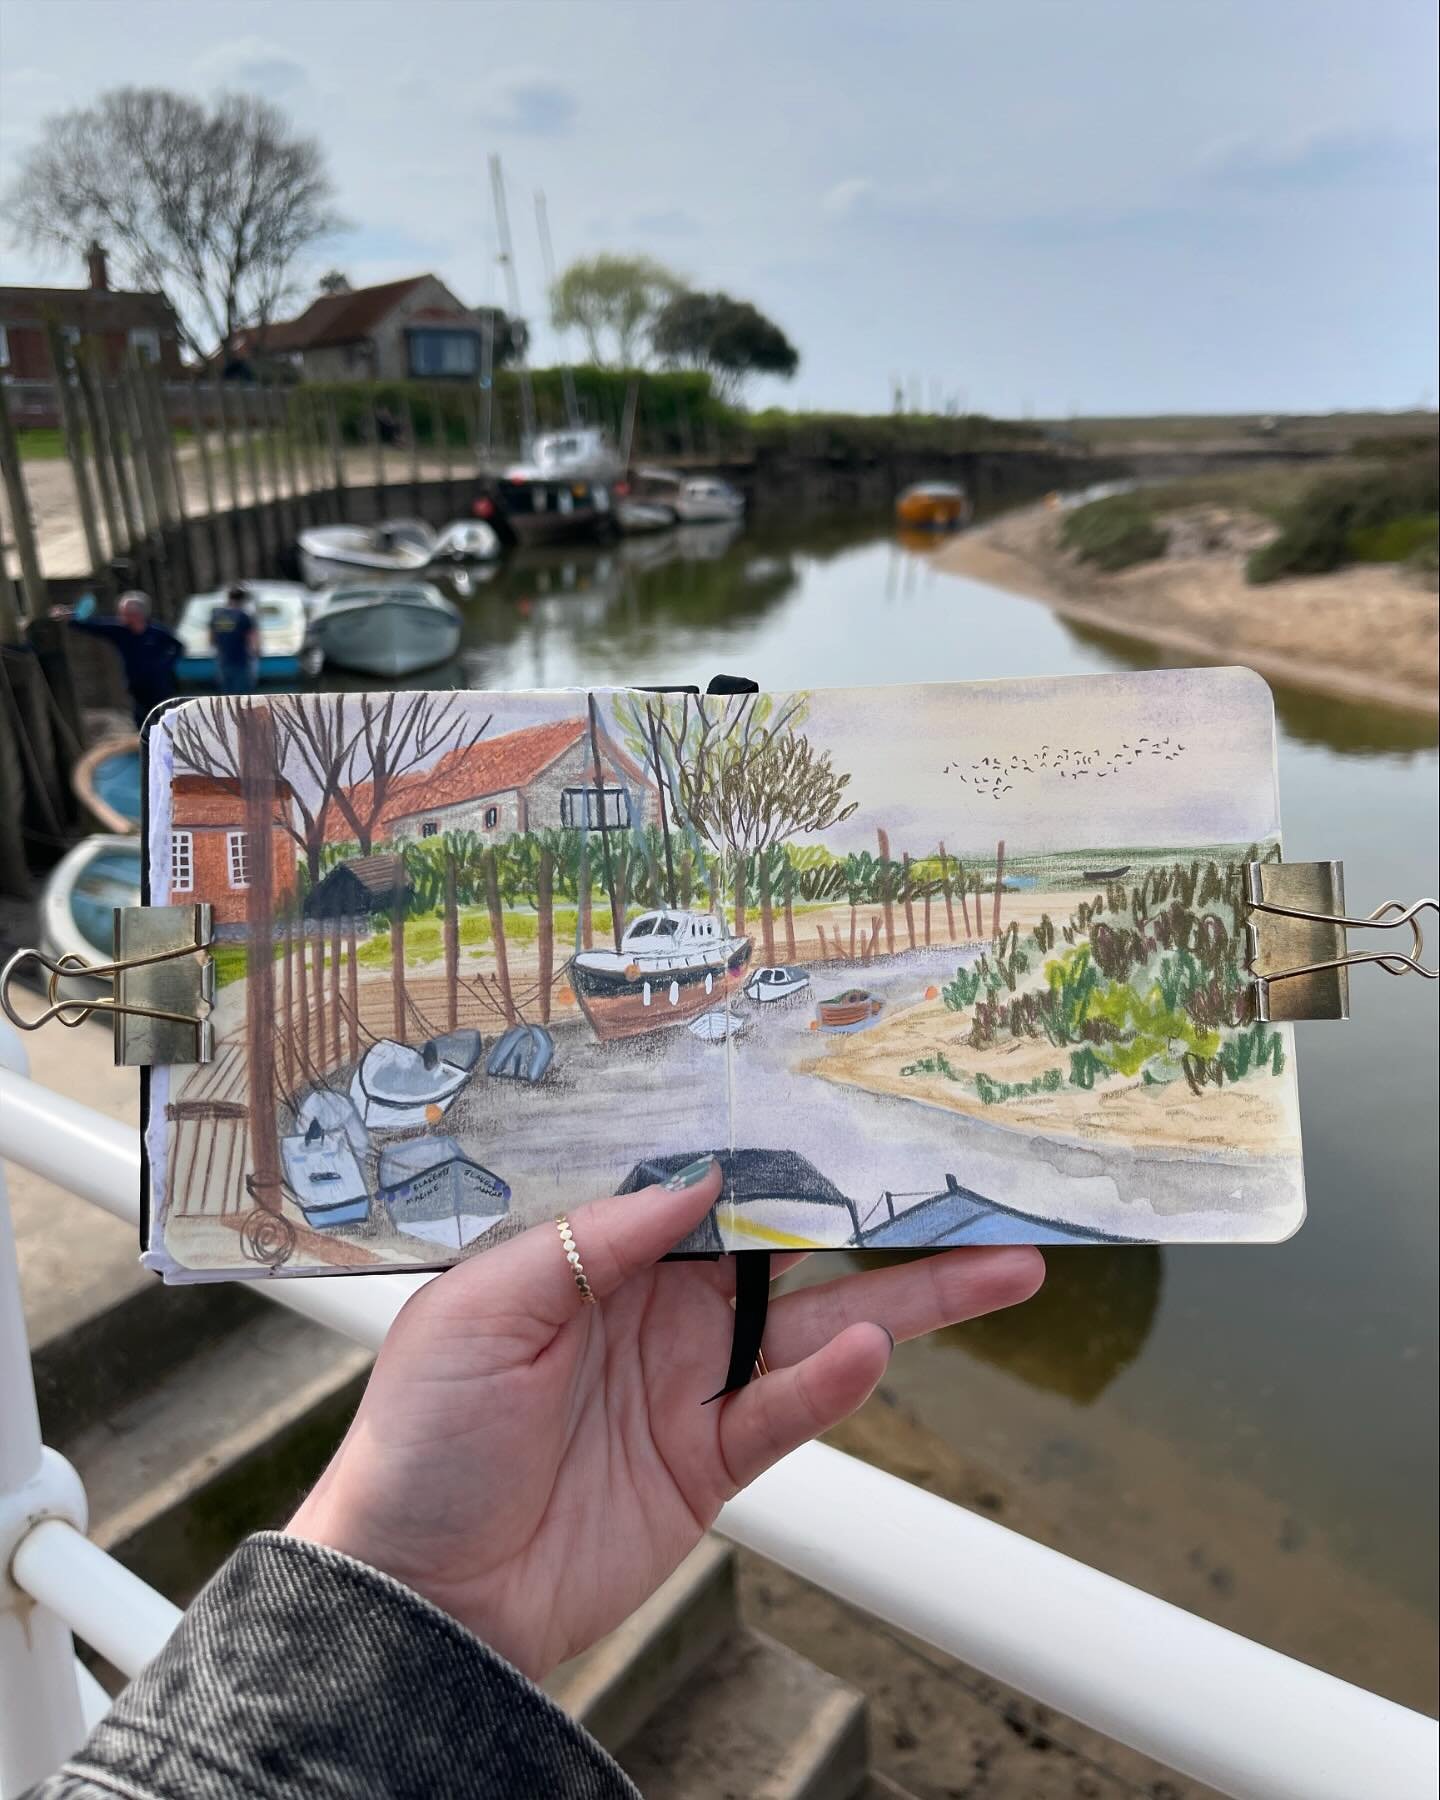 This time last year I was welcoming in May in the beautiful seaside town of Blakeney in Norfolk. And this year it&rsquo;s May&rsquo;s calendar page!

Not the same thing for sure, but better than nothing&hellip;

I&rsquo;ll be sending off the designs 